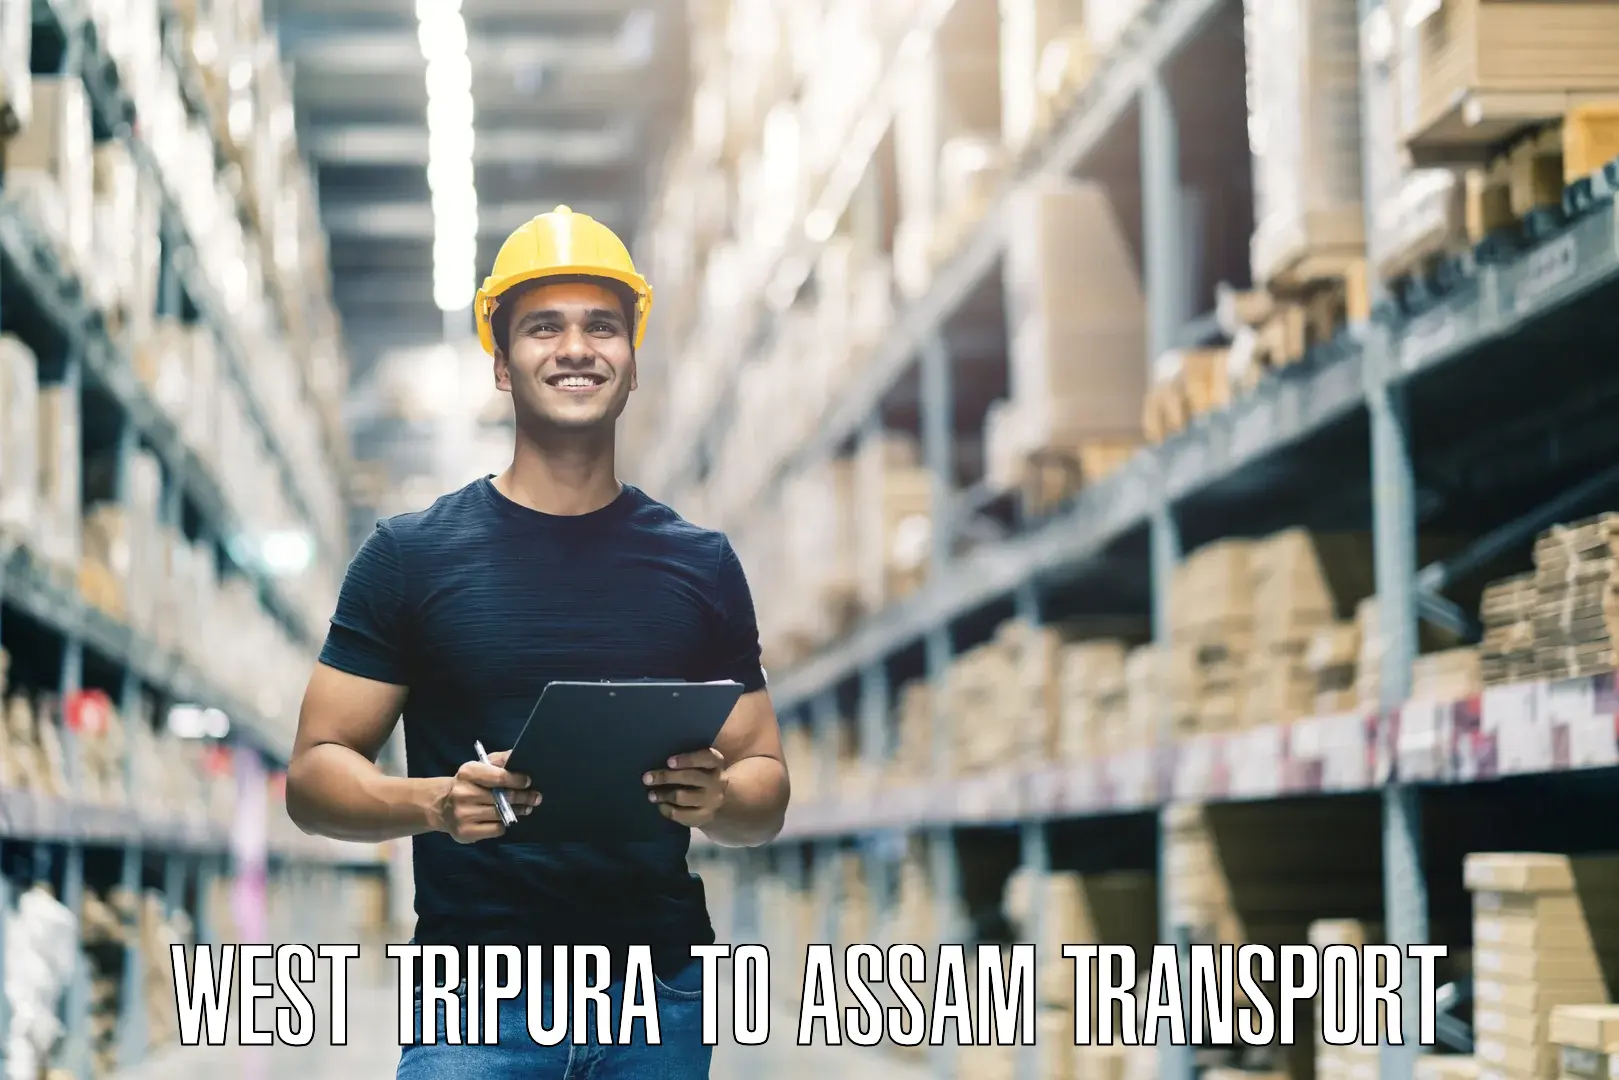 Express transport services in West Tripura to Noonmati